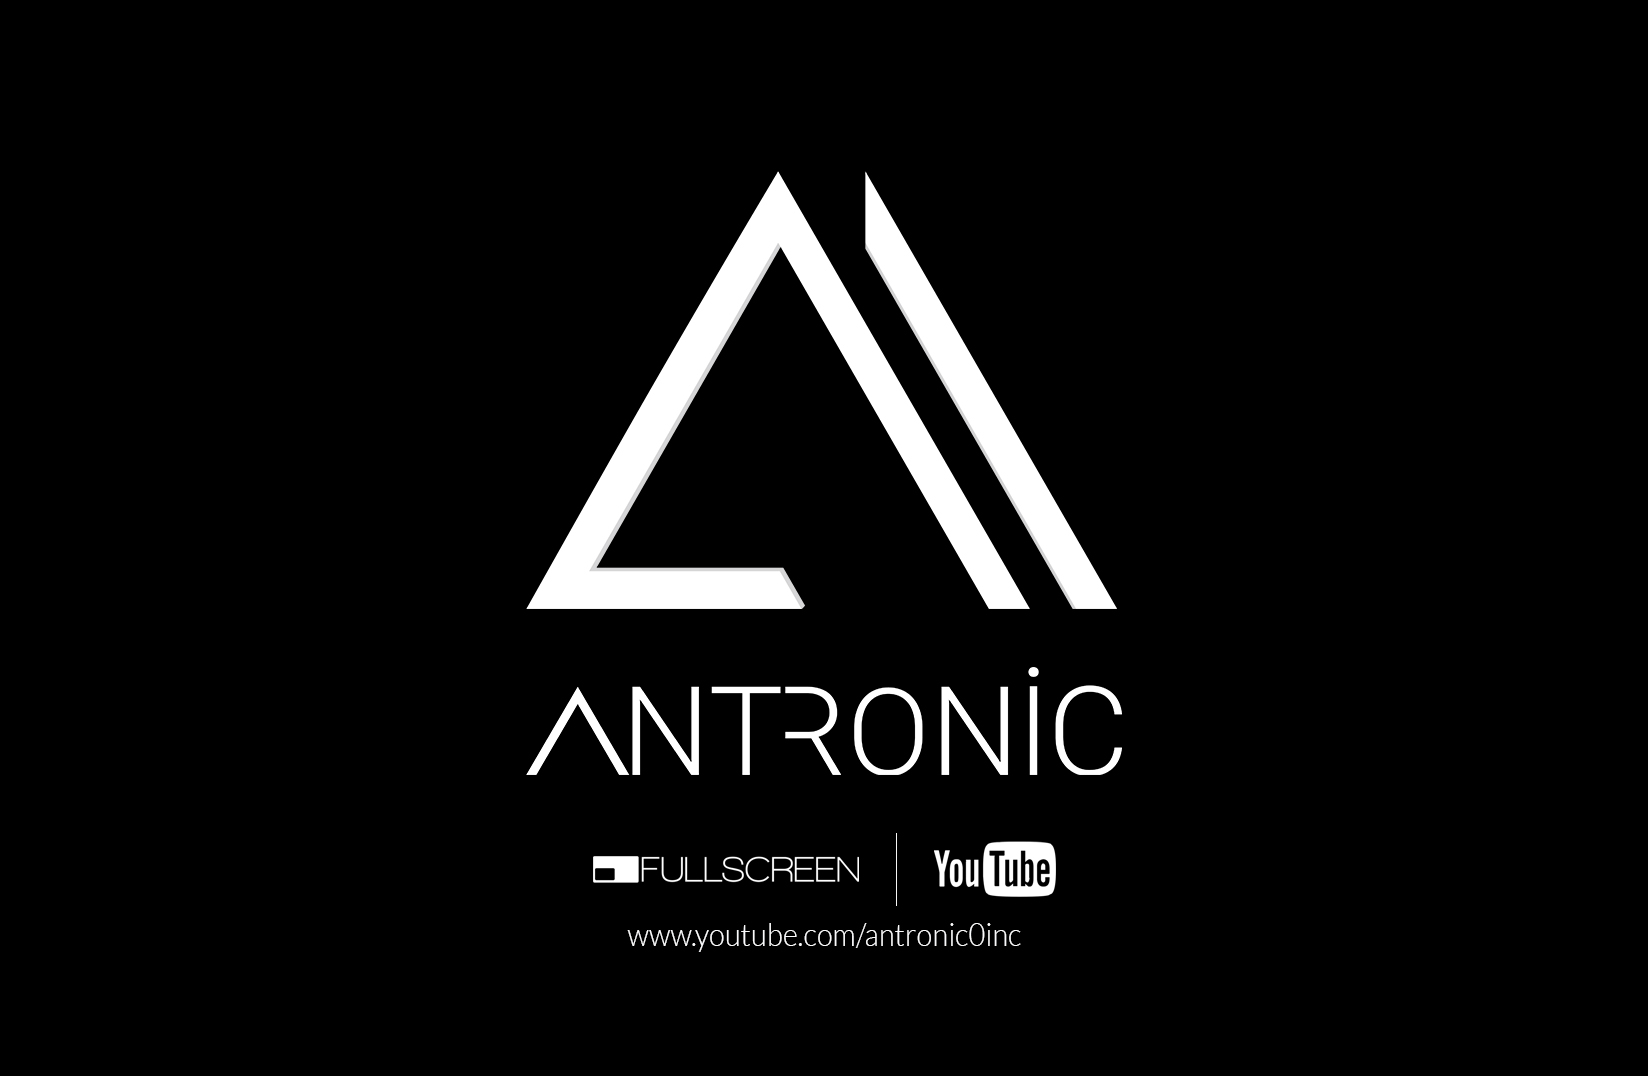 antronic's channel